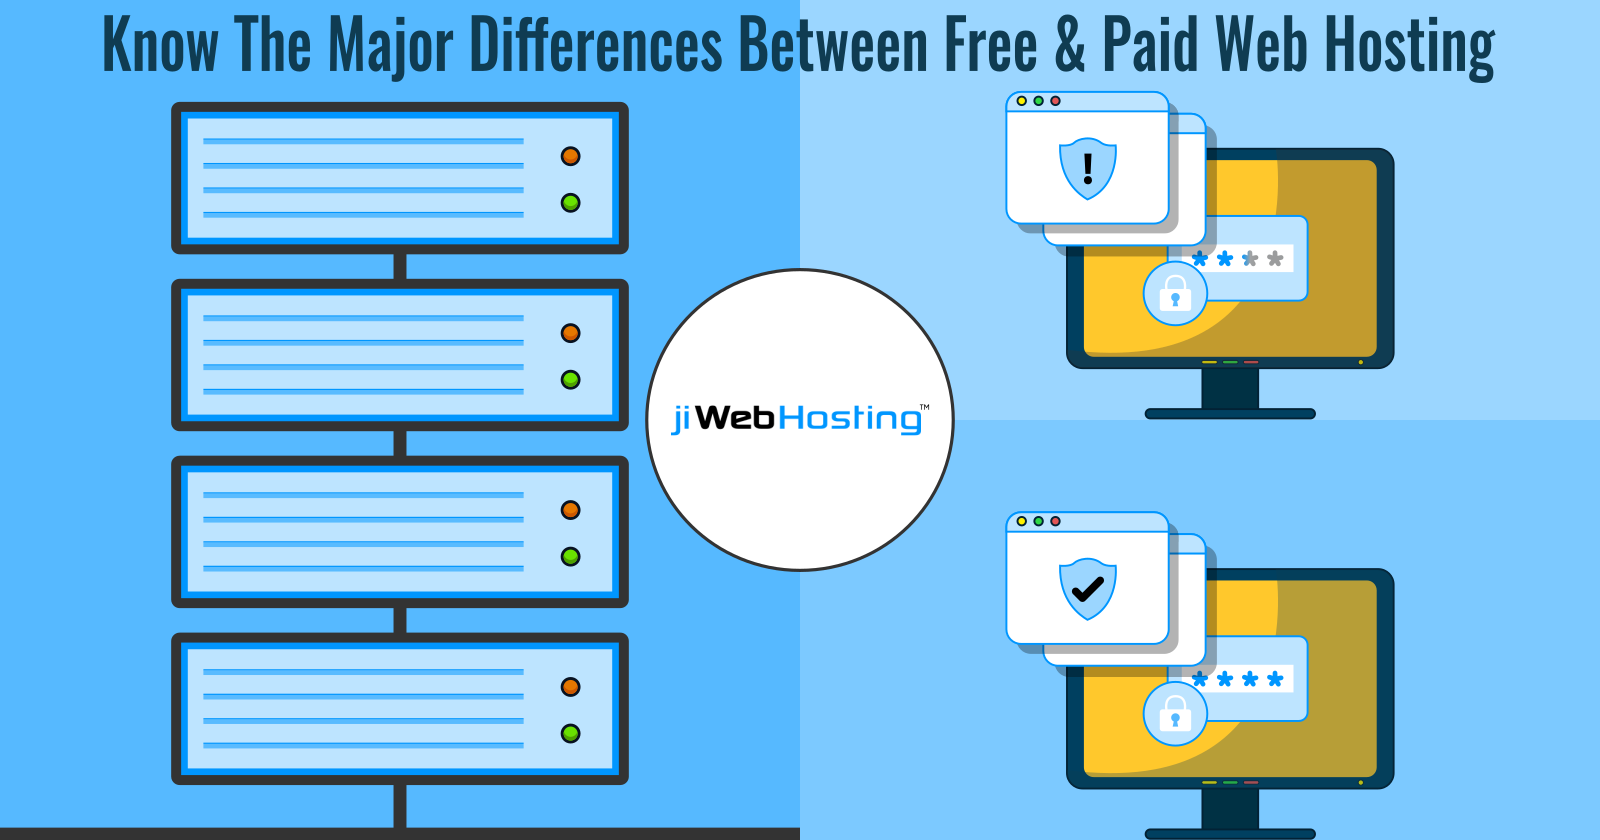 Know The Major Differences Between Free & Paid Web Hosting